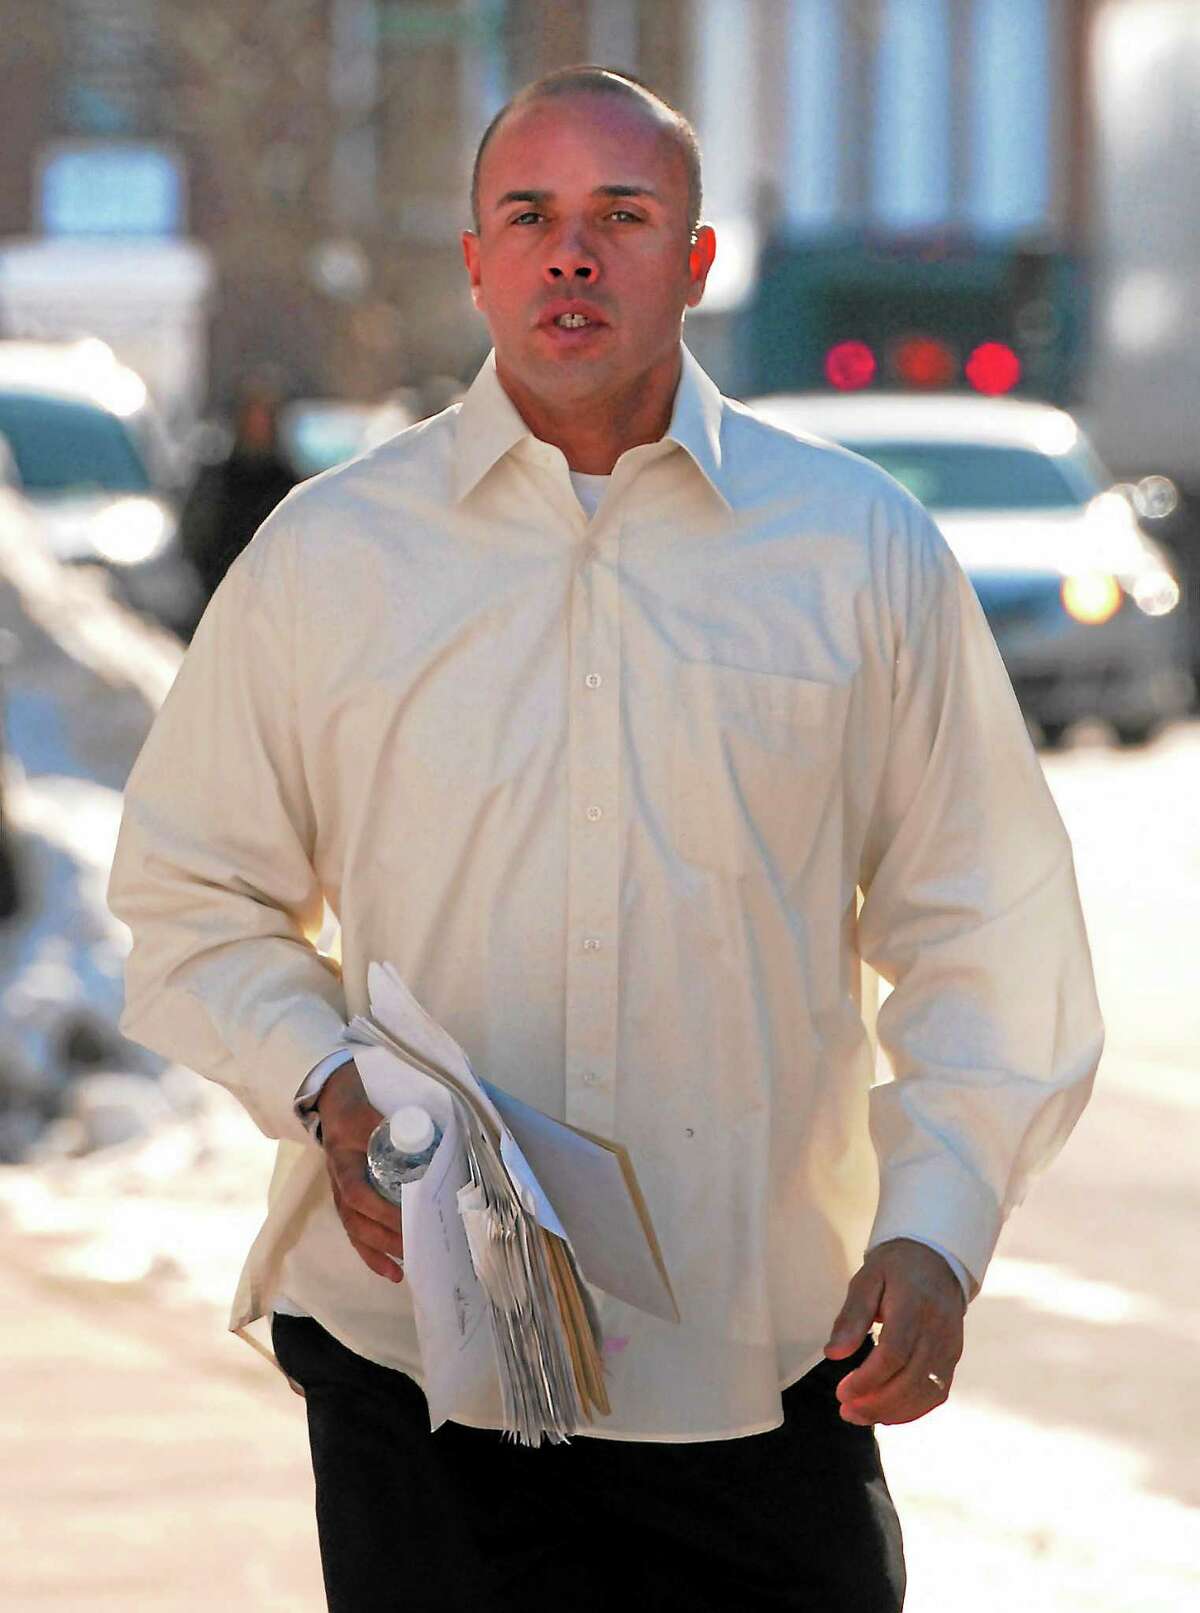 Angelo Reyes of New Haven at a 2011 hearing at Federal Court in Hartford.